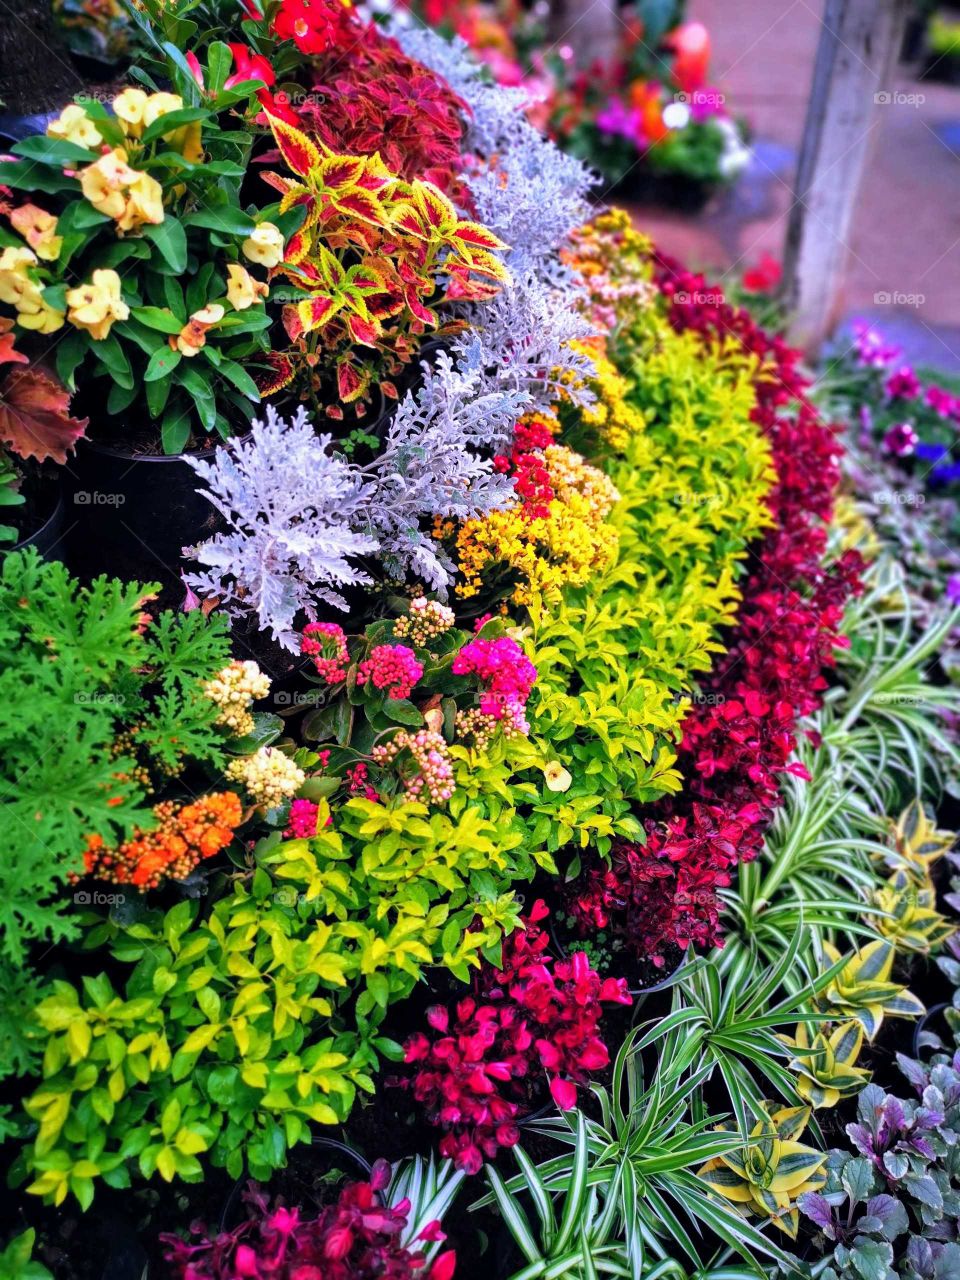 Multicolors, Flowers And More Flowers, Beautiful